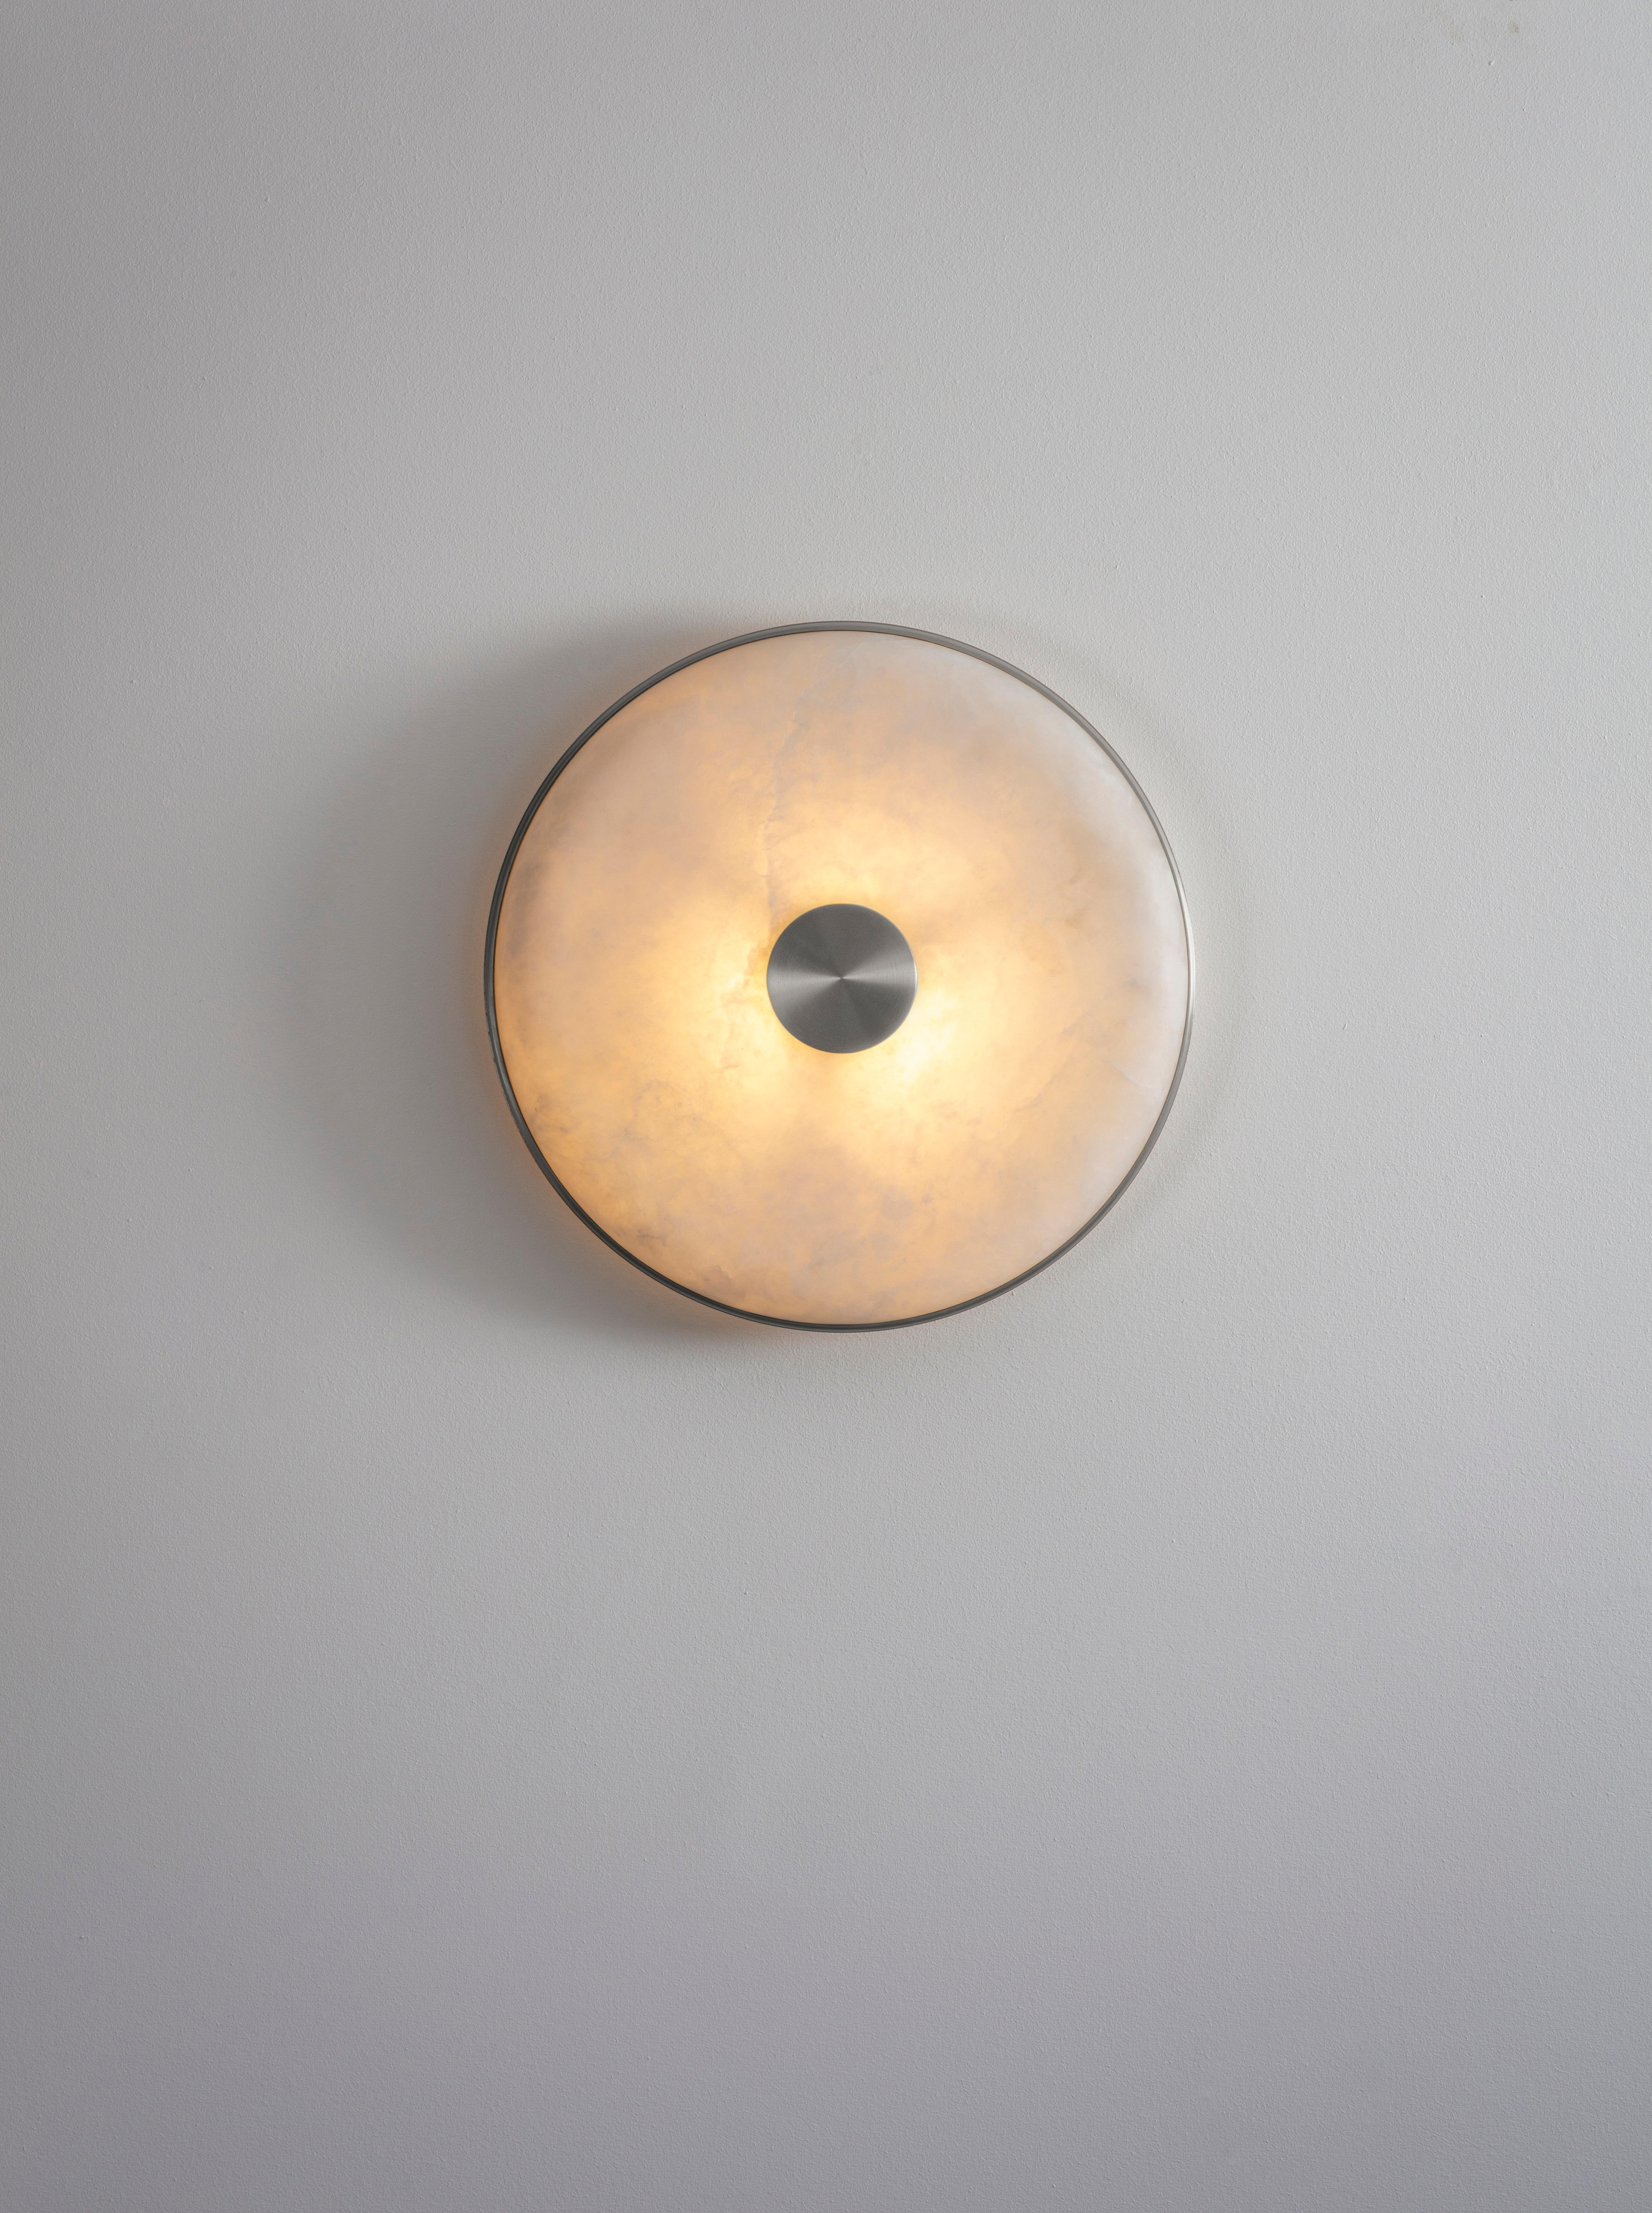 Beran wall light nickel small by Bert Frank
Dimensions: ?26 x 6cm
Materials: Nickel


All our lamps can be wired according to each country. If sold to the USA it will be wired for the USA for instance.

When Adam Yeats and Robbie Llewellyn